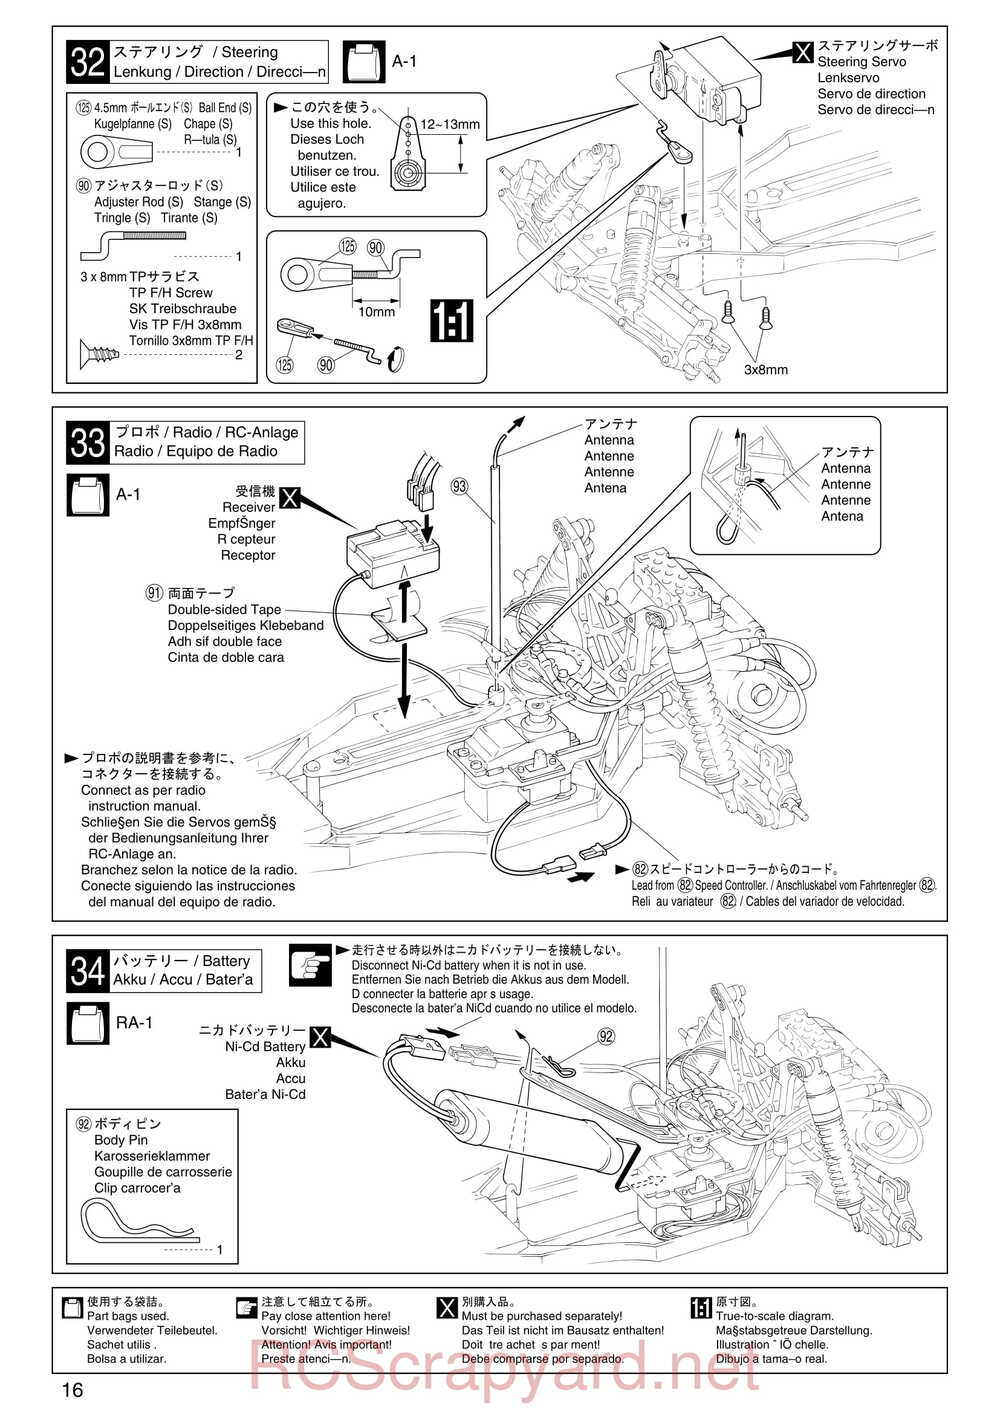 Kyosho - 30072 - EP-Ultima-RB-Racing-Sports - Manual - Page 16